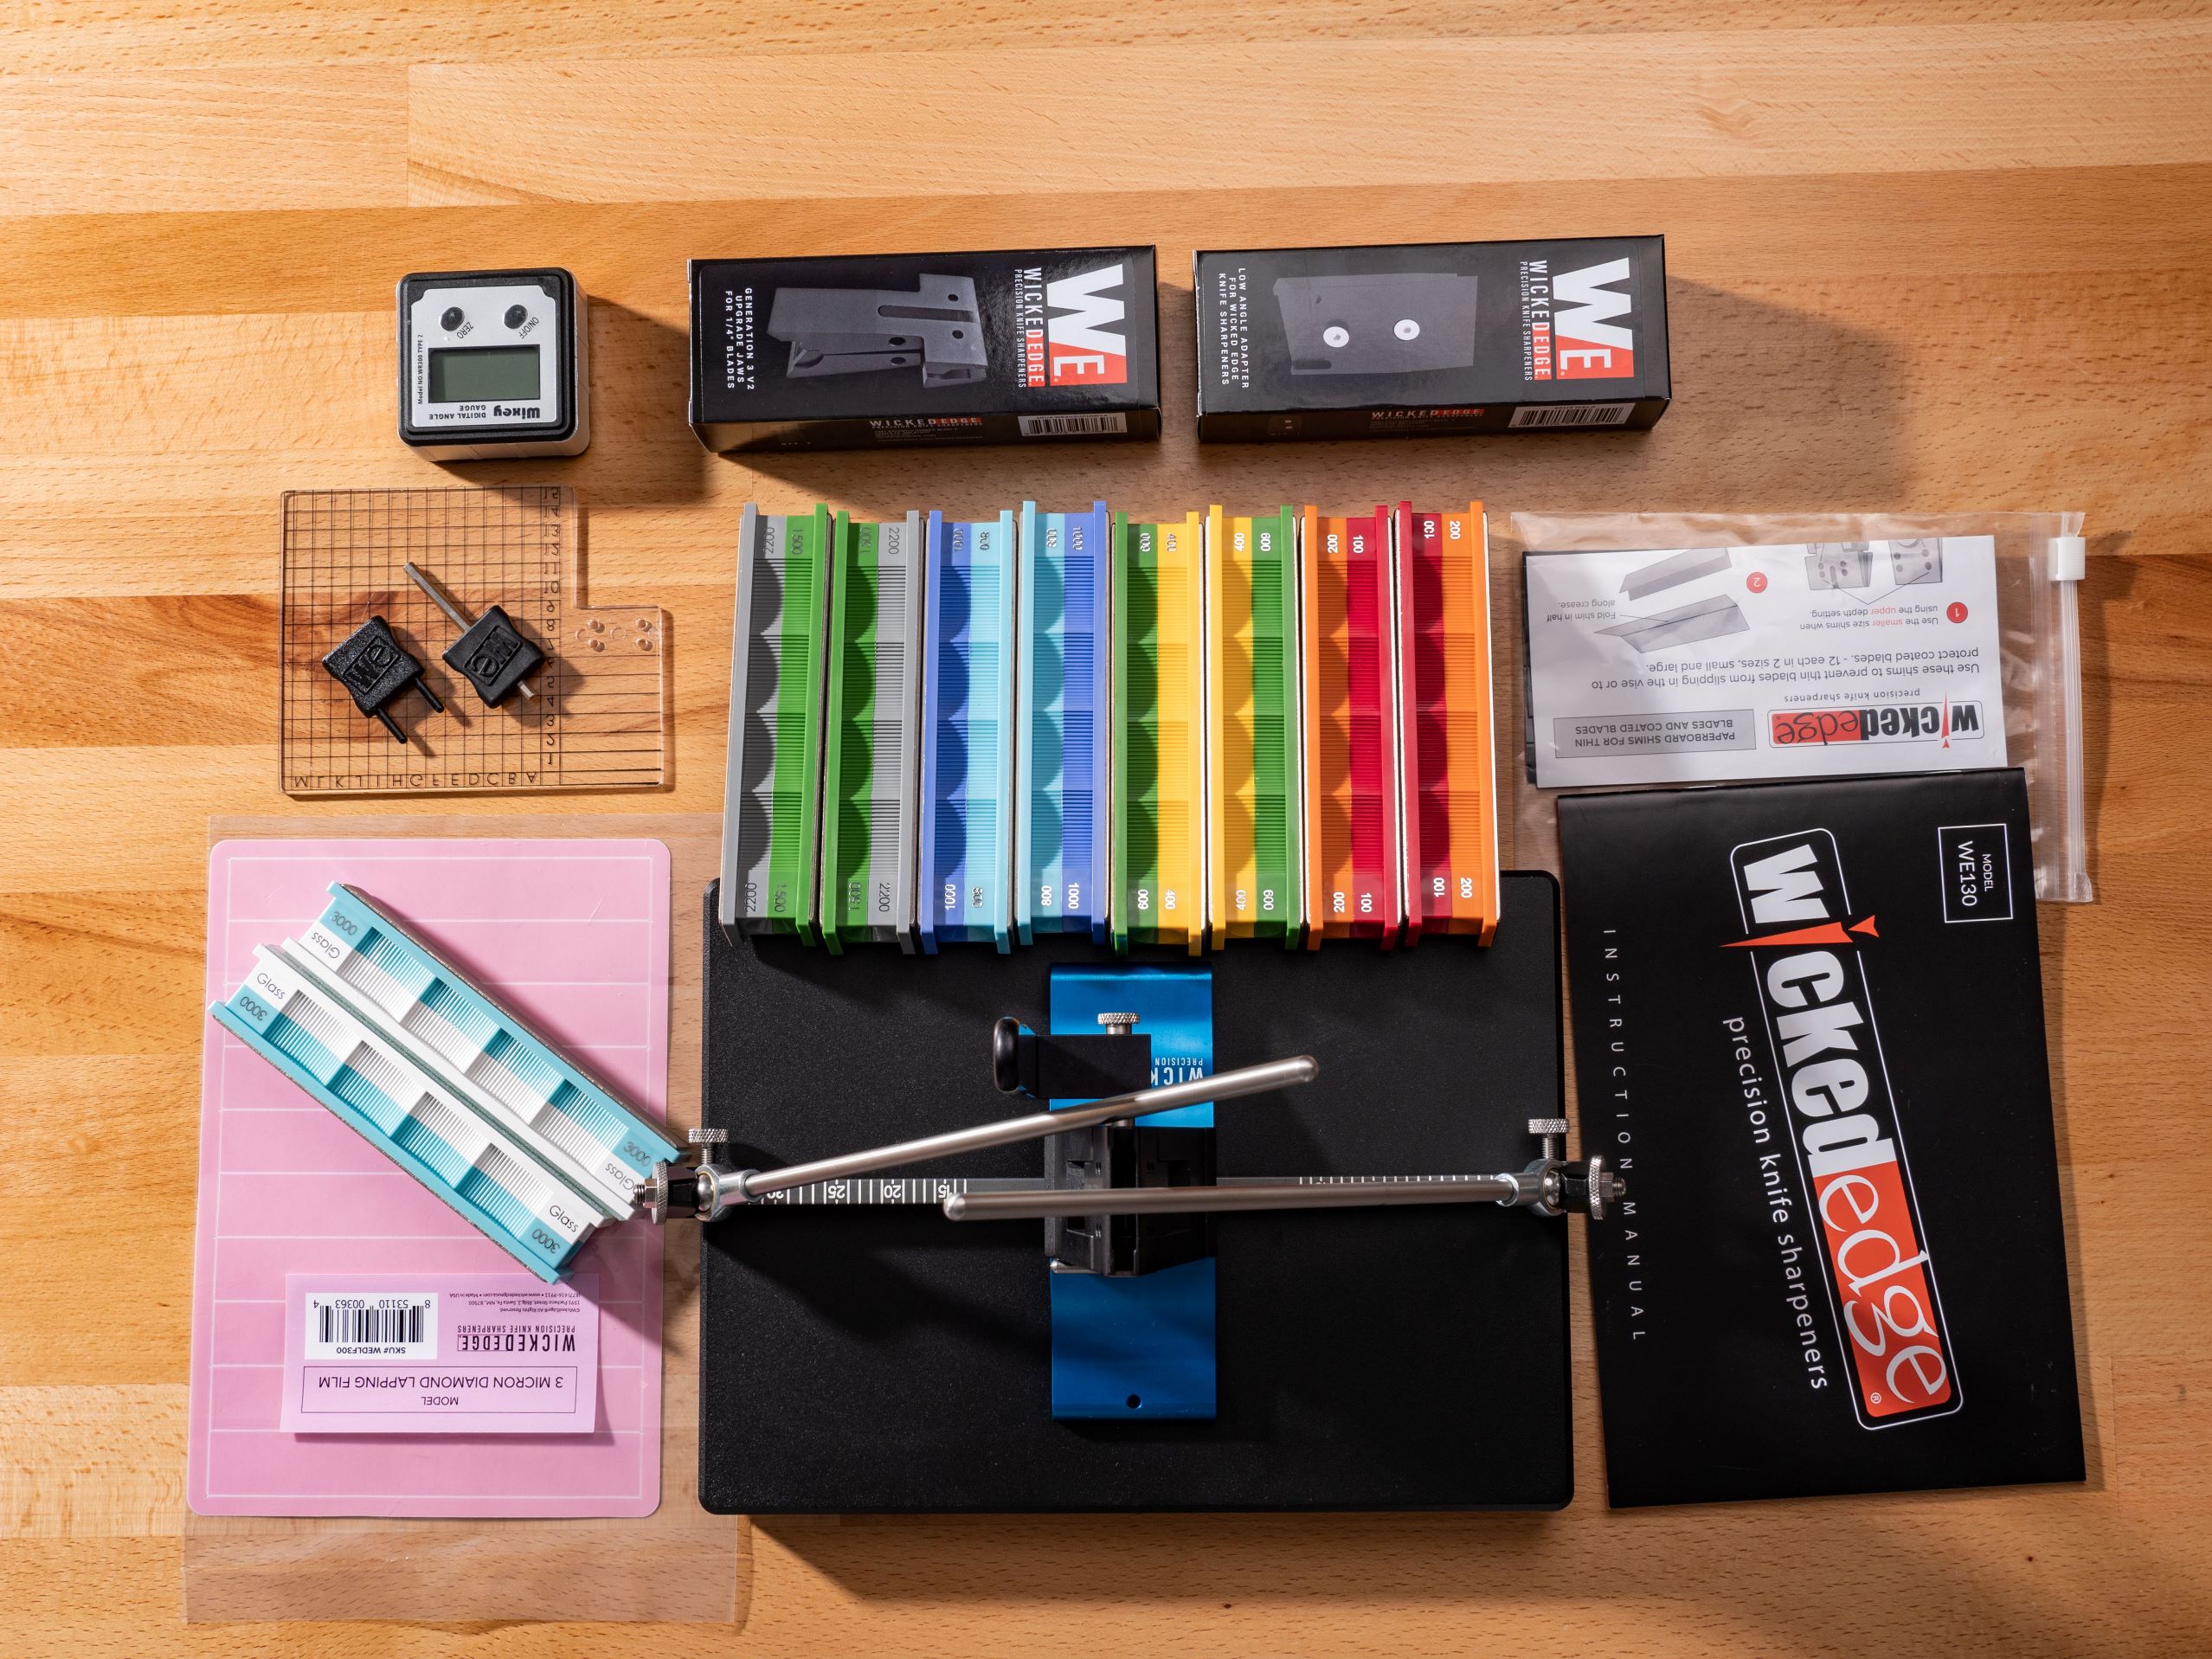 Wicked Edge Generation 3 Pro sharpening system